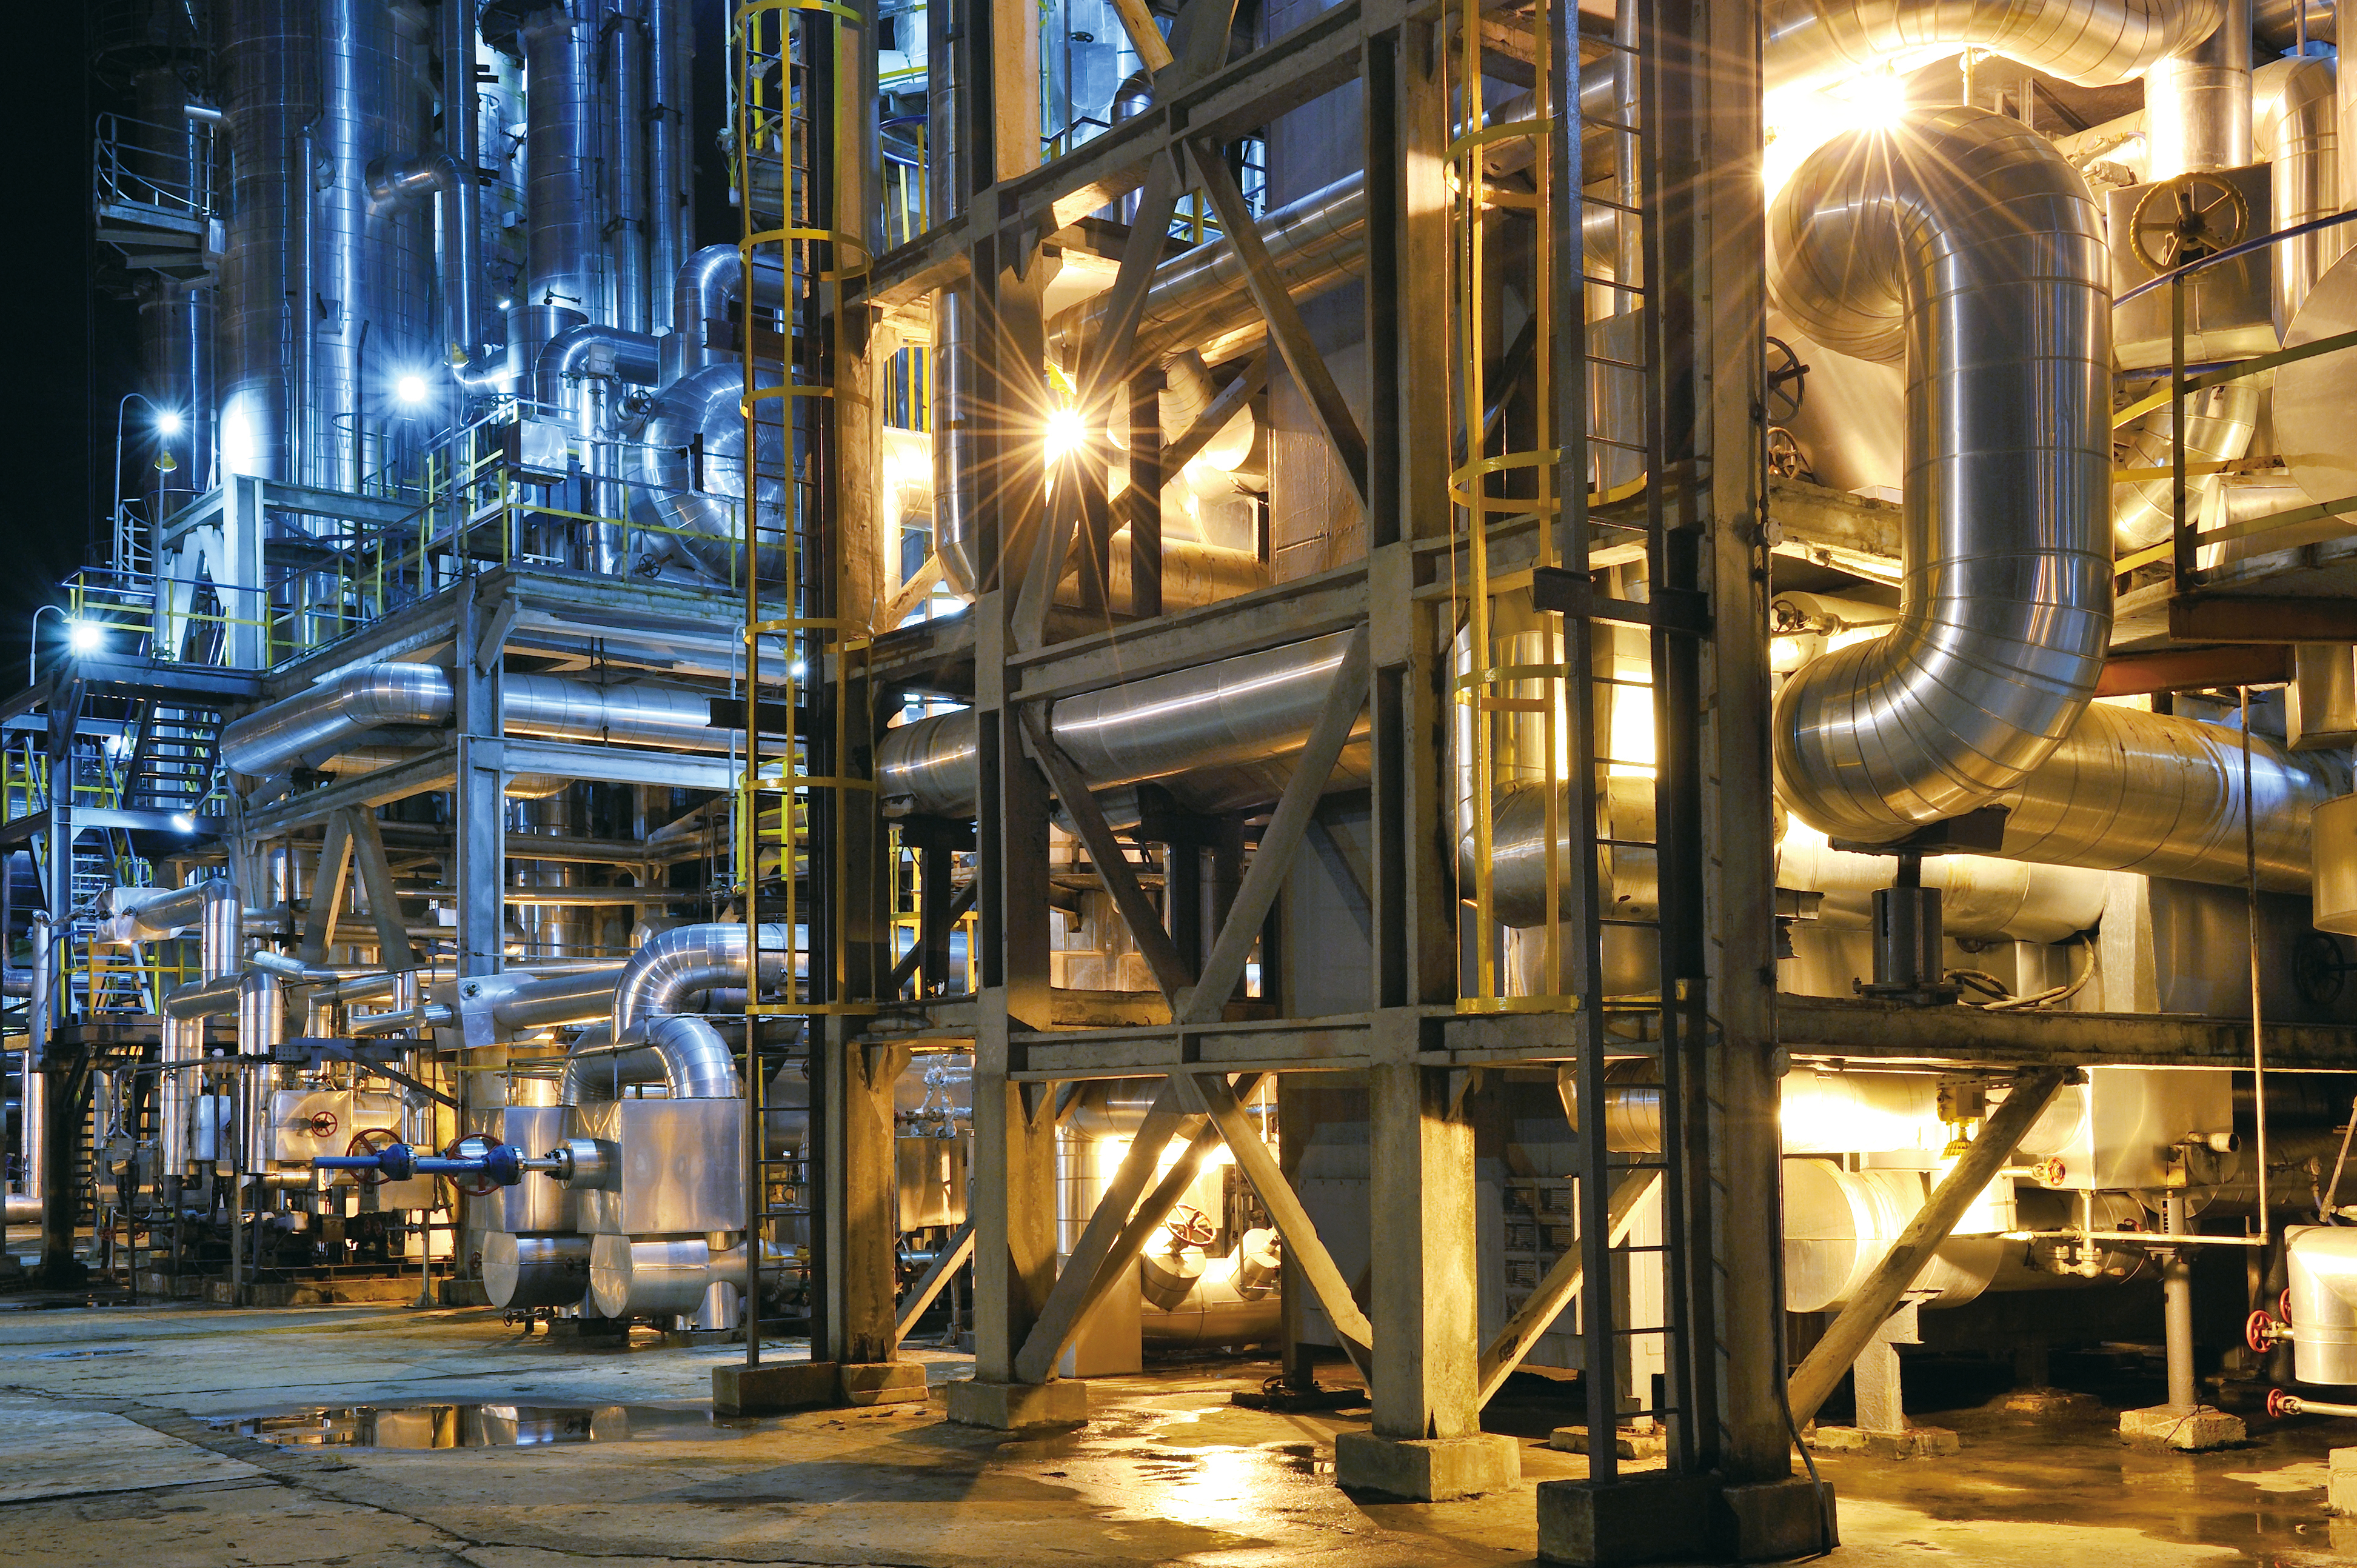 Chemical process industry